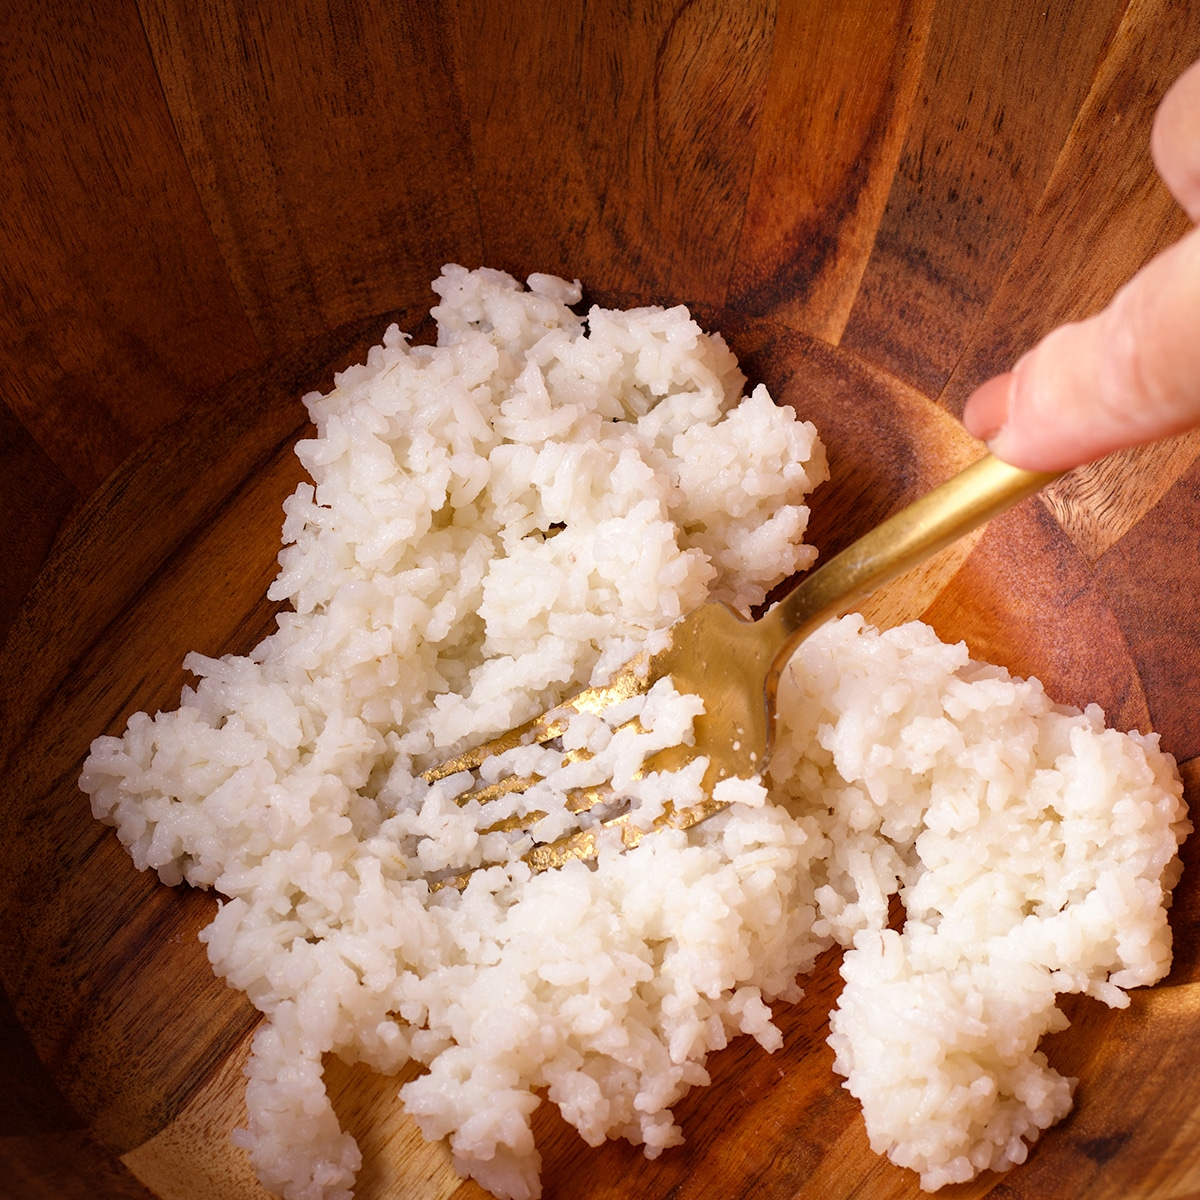 Someone using a fork to mash cooked white rice in a wood bowl.